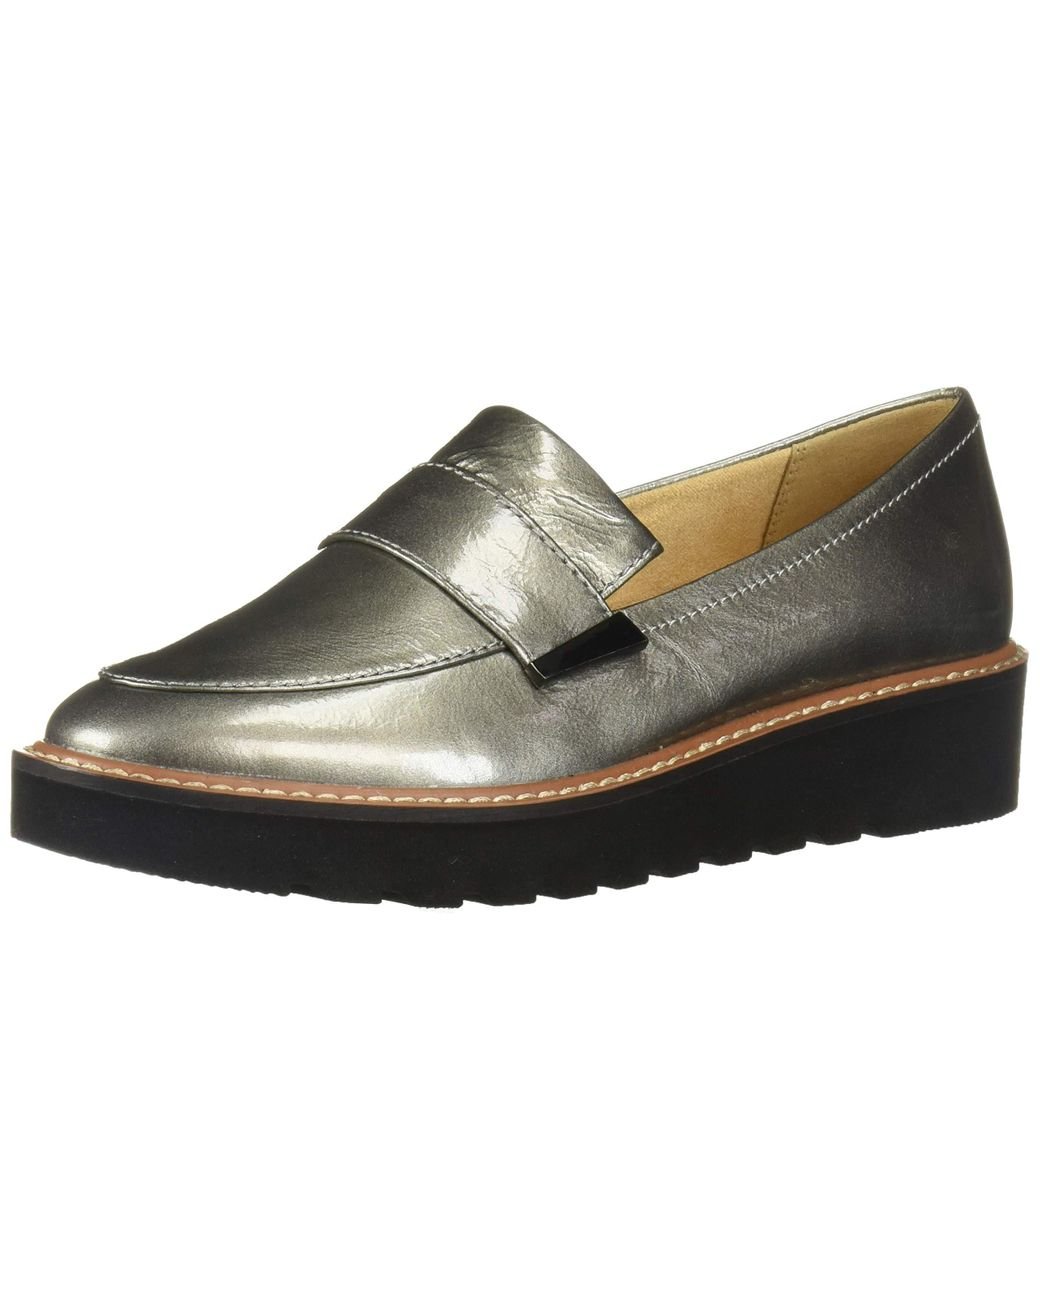 Naturalizer Adiline Loafer - Save 4% - Lyst